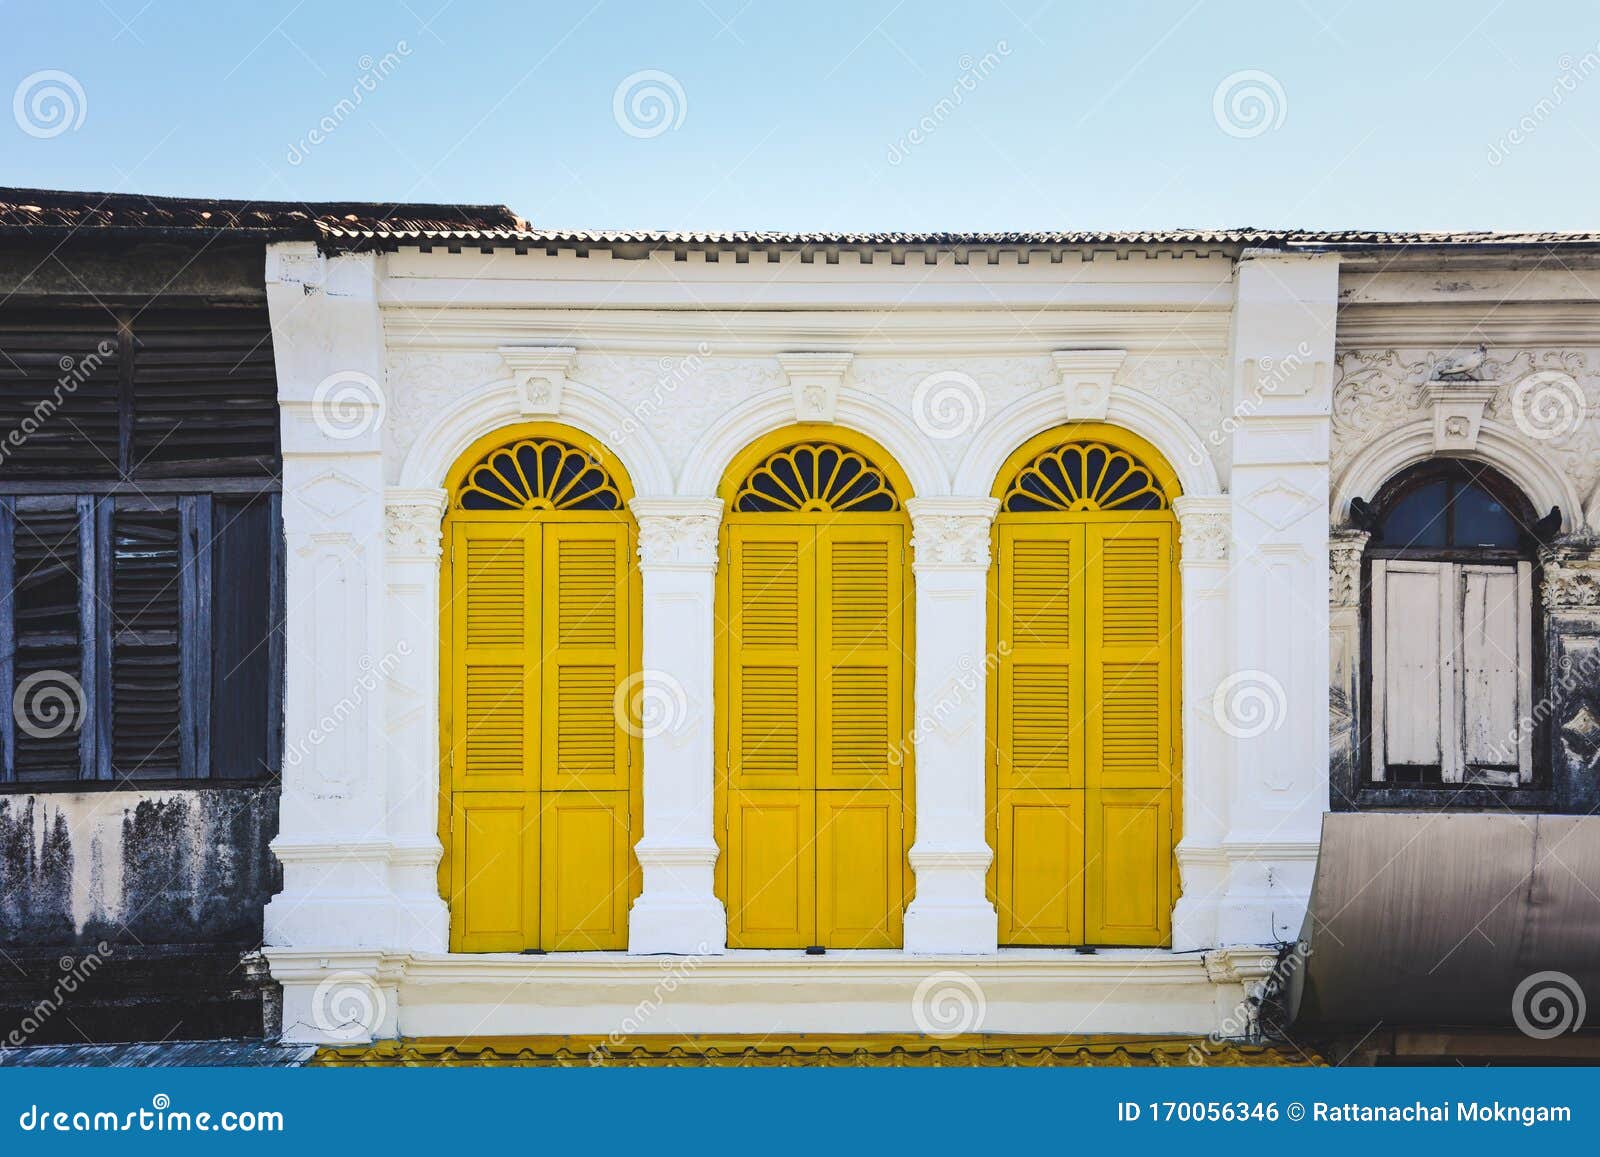 yellow color wooden arched window on white cement wall in chino portuguese style at phuket old town, thailand